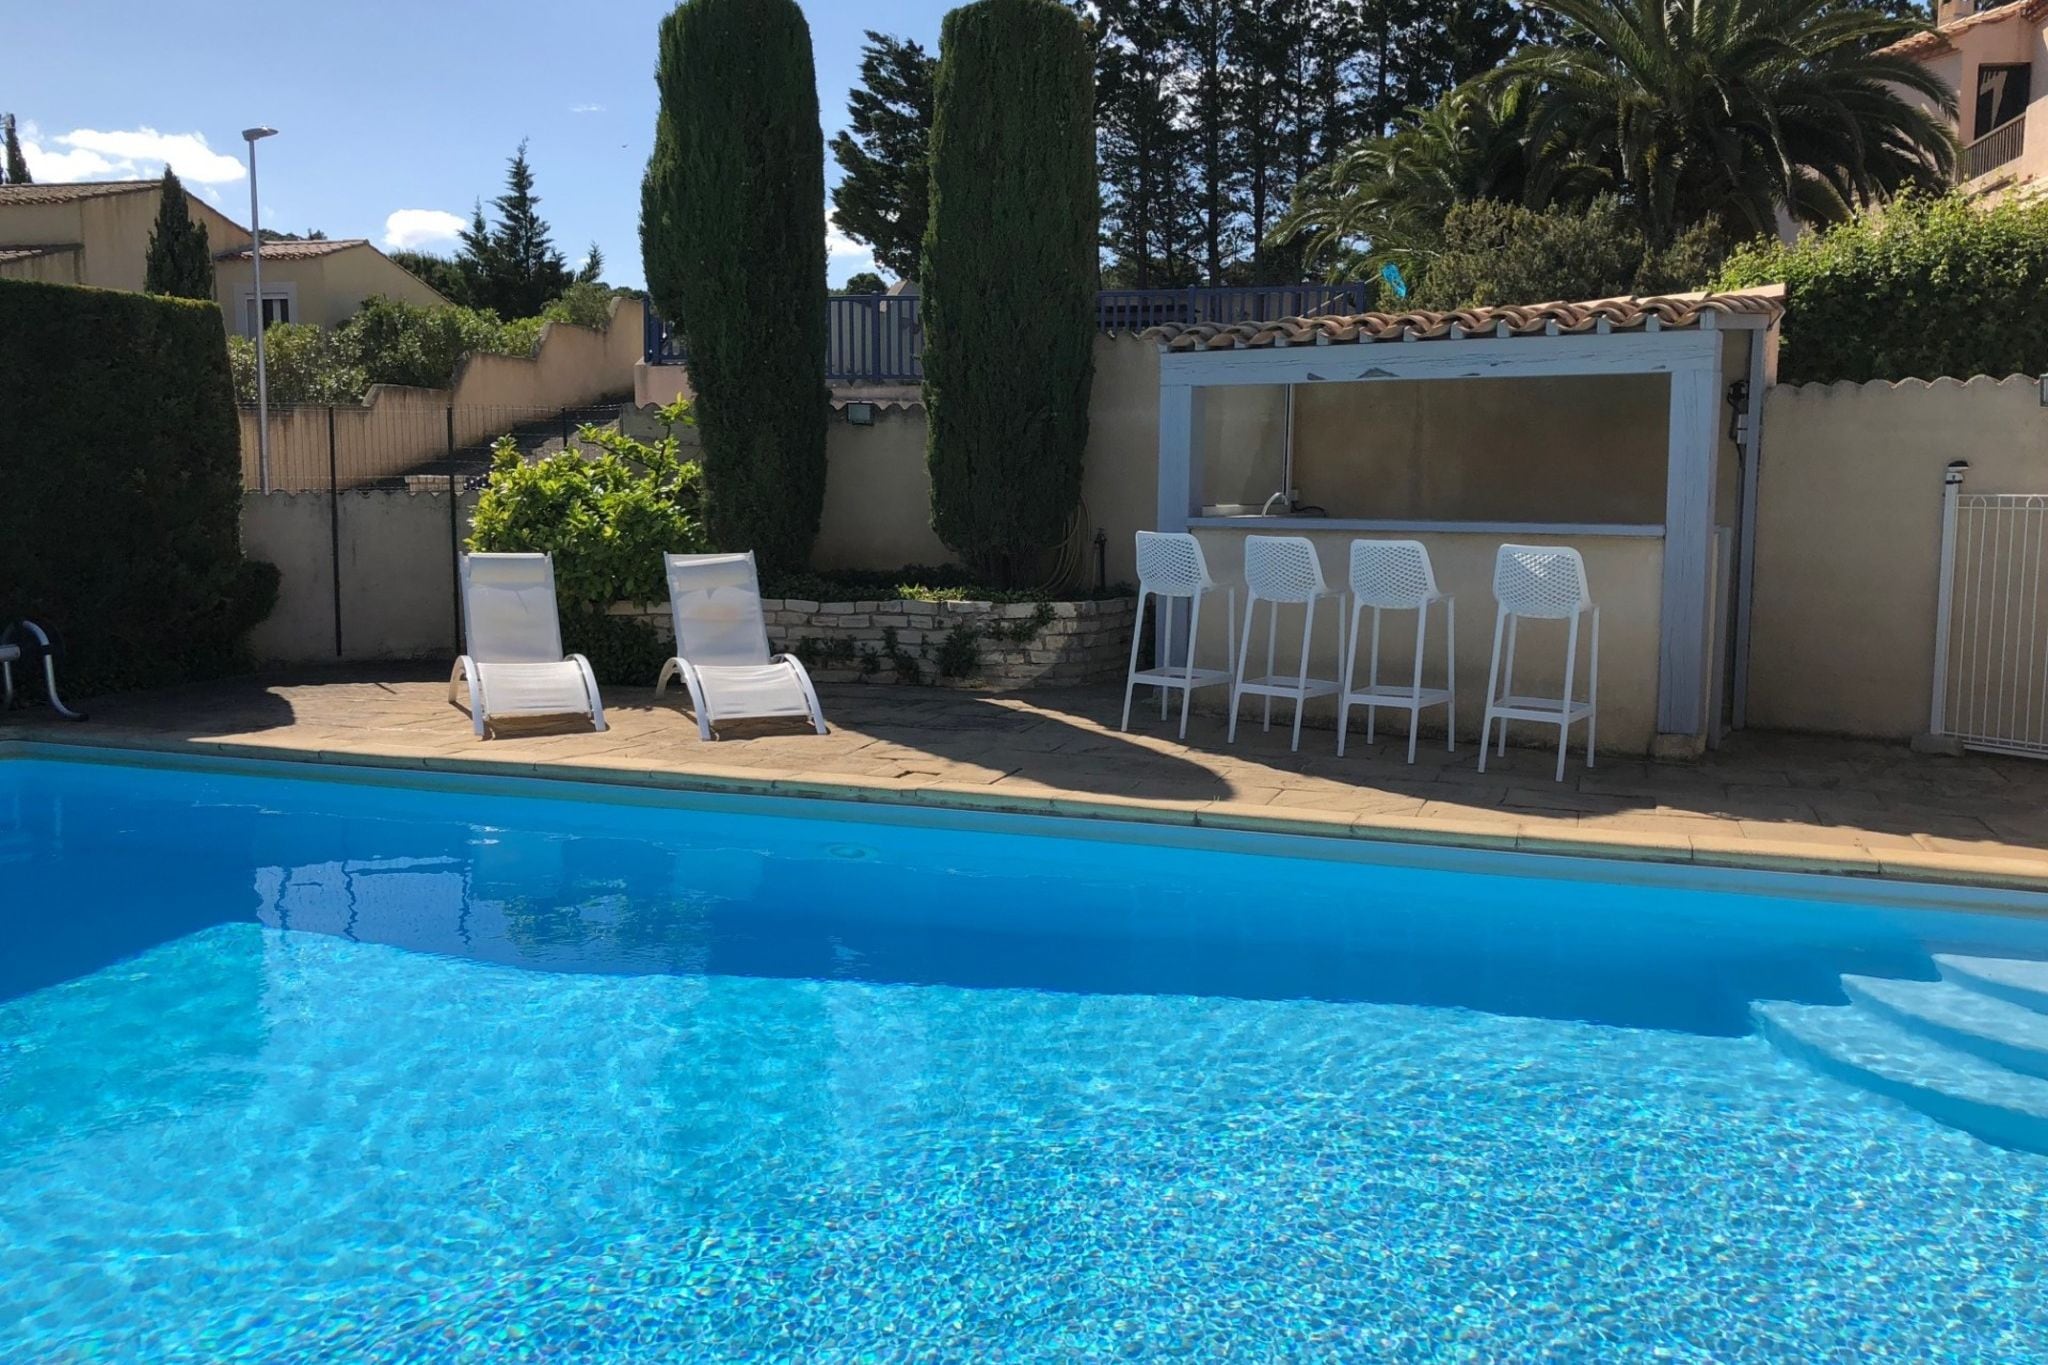 Holiday villa near Narbonne-Plage, fenced private swimming pool and view of a lake